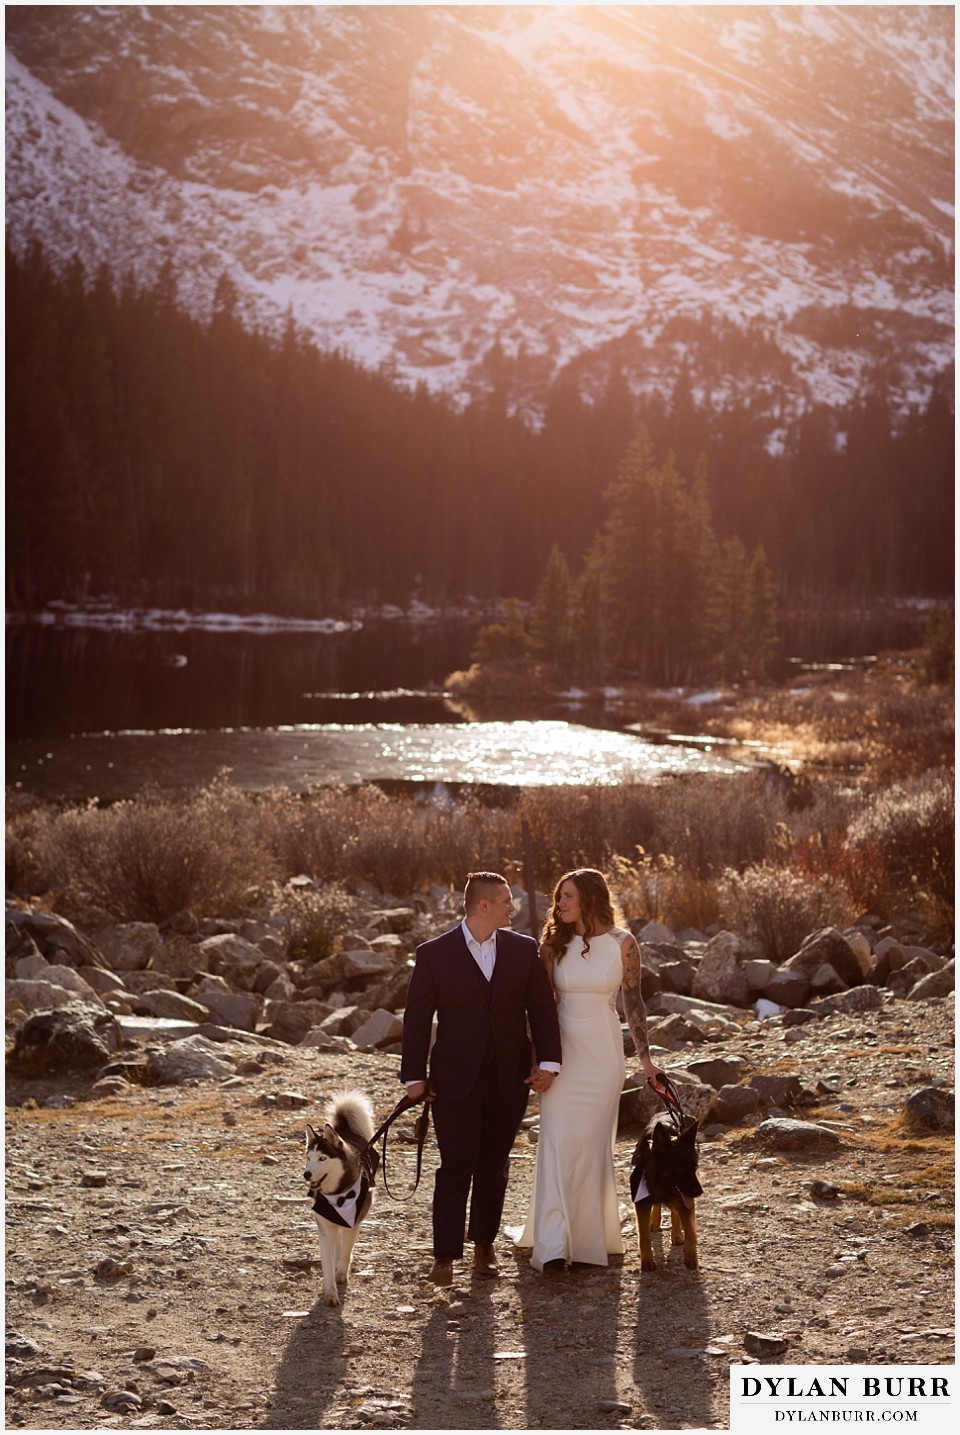 wedding couple walking with dressed up dogs in mountains at sunset breckenridge colorado wedding